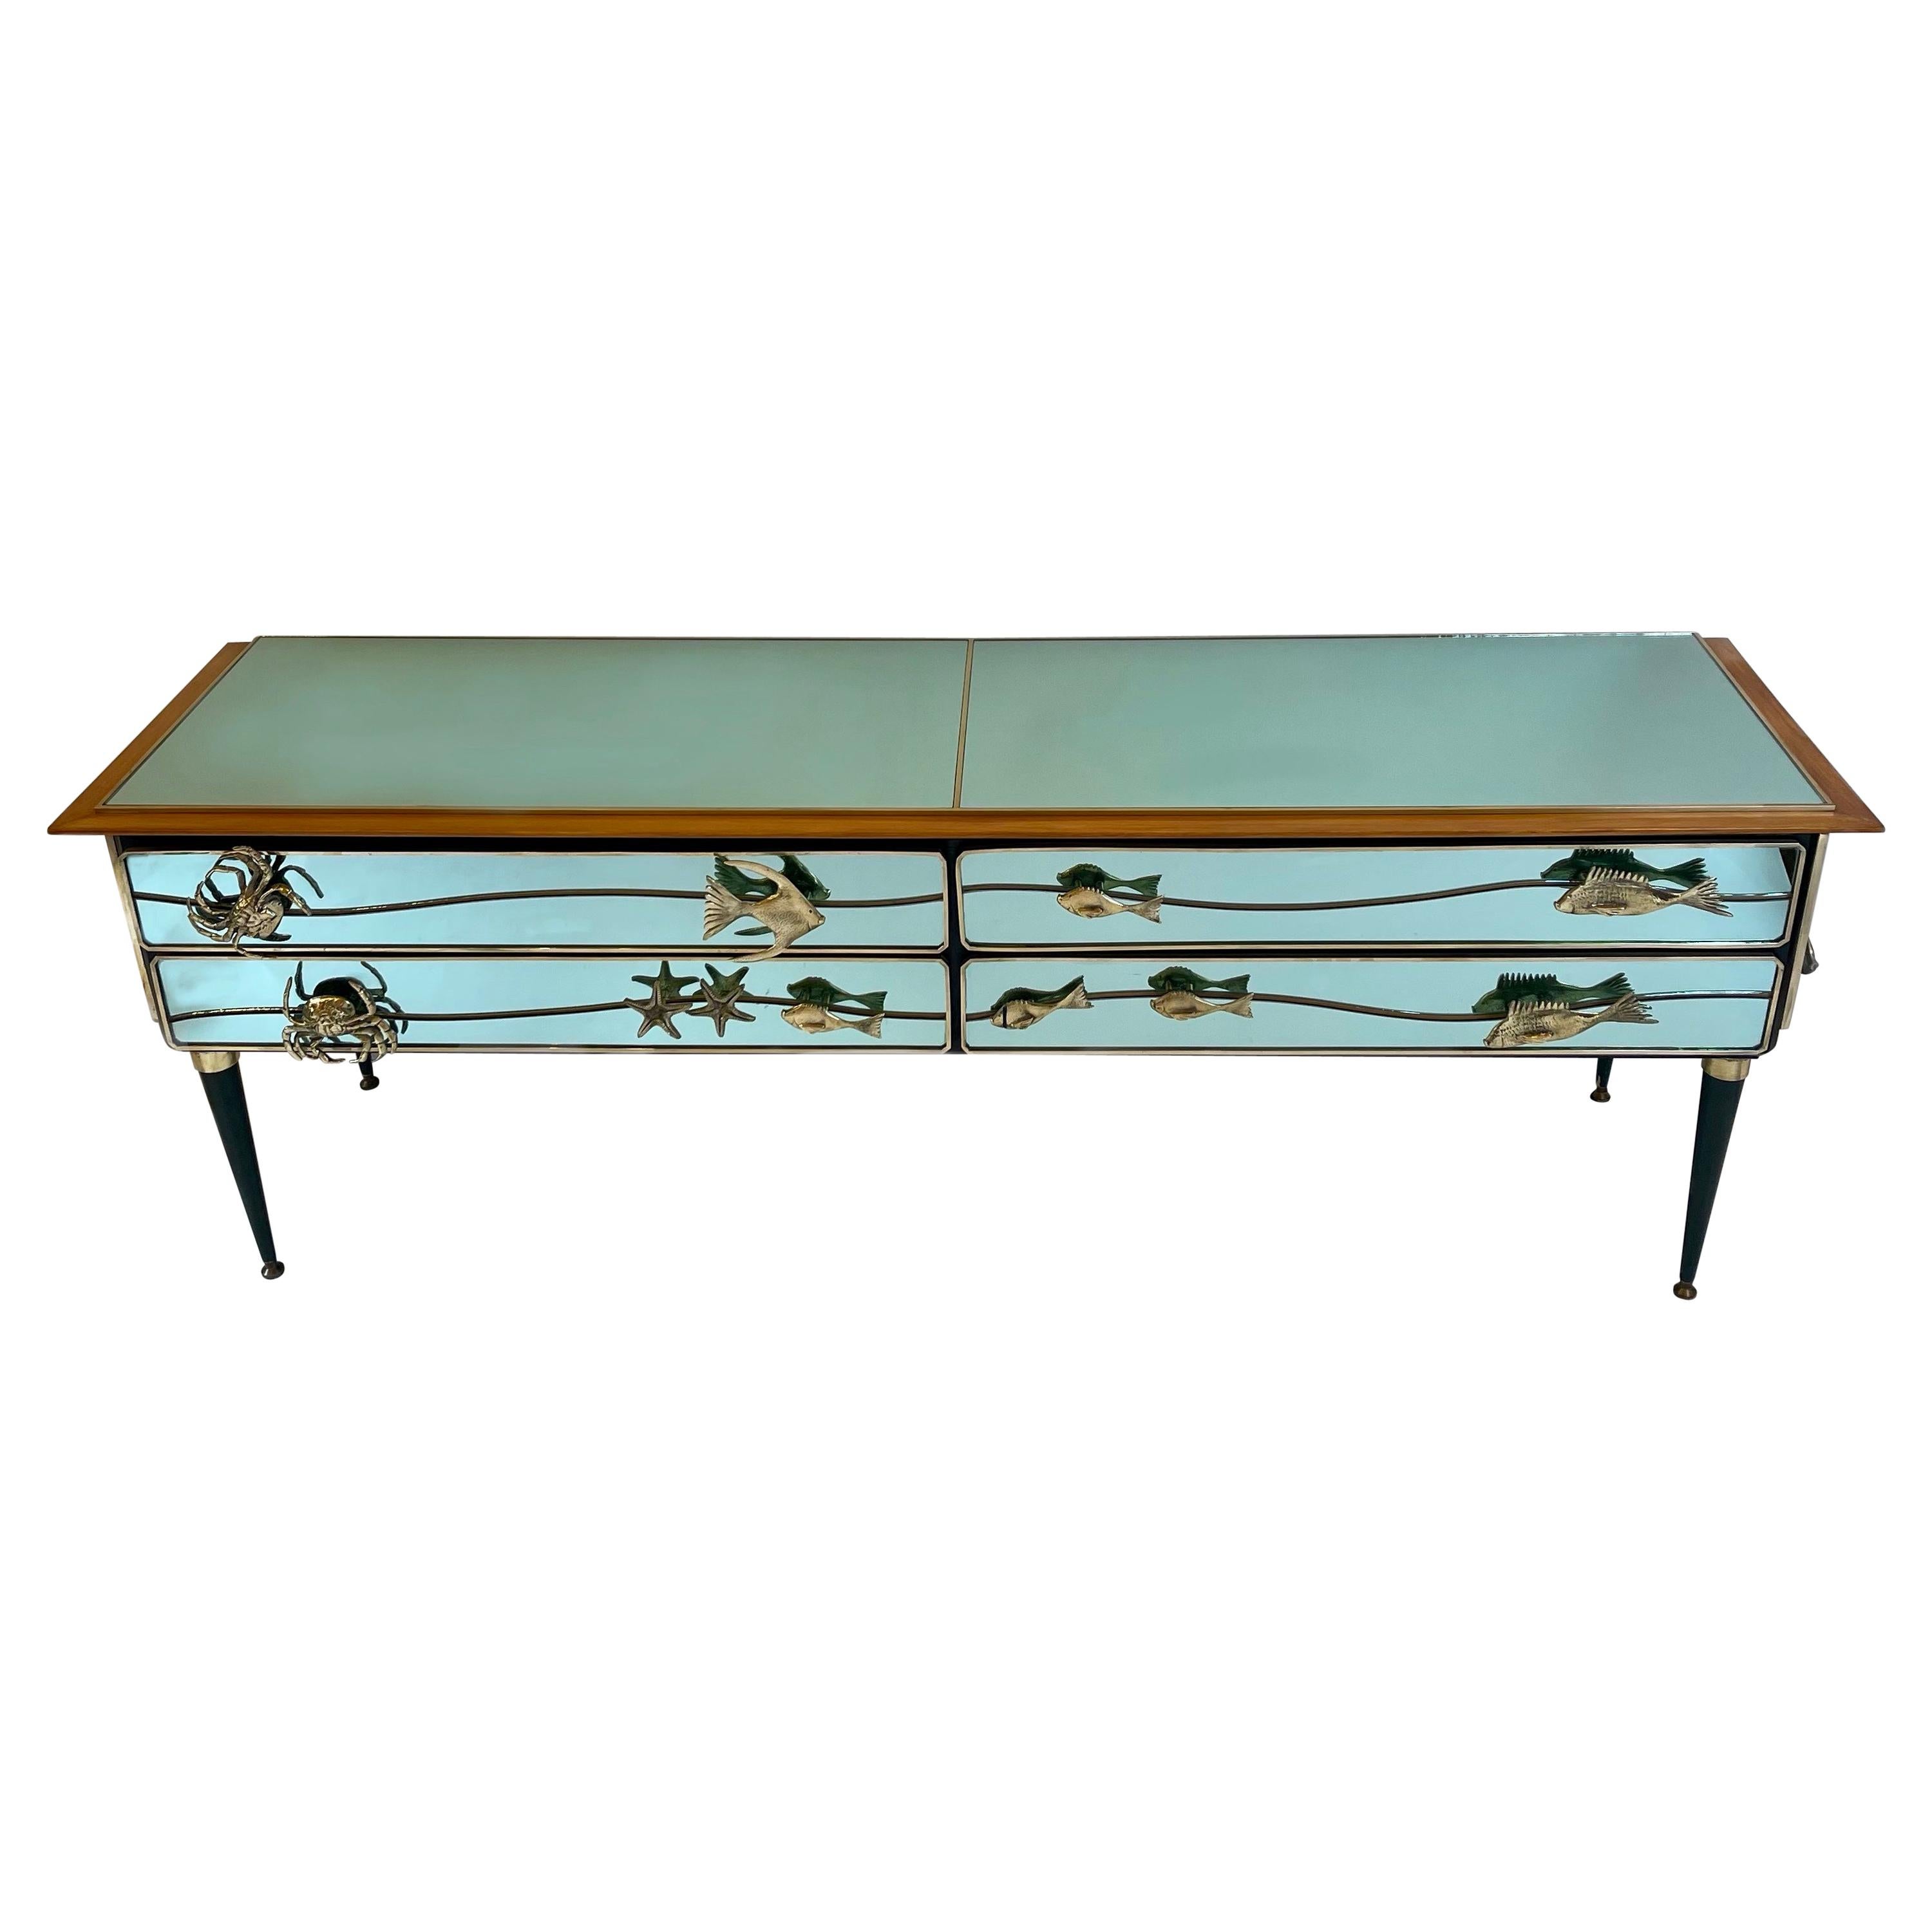 Late 20th Century Mint Green Mirror w/ Bronze & Brass Details Chest of Drawers For Sale